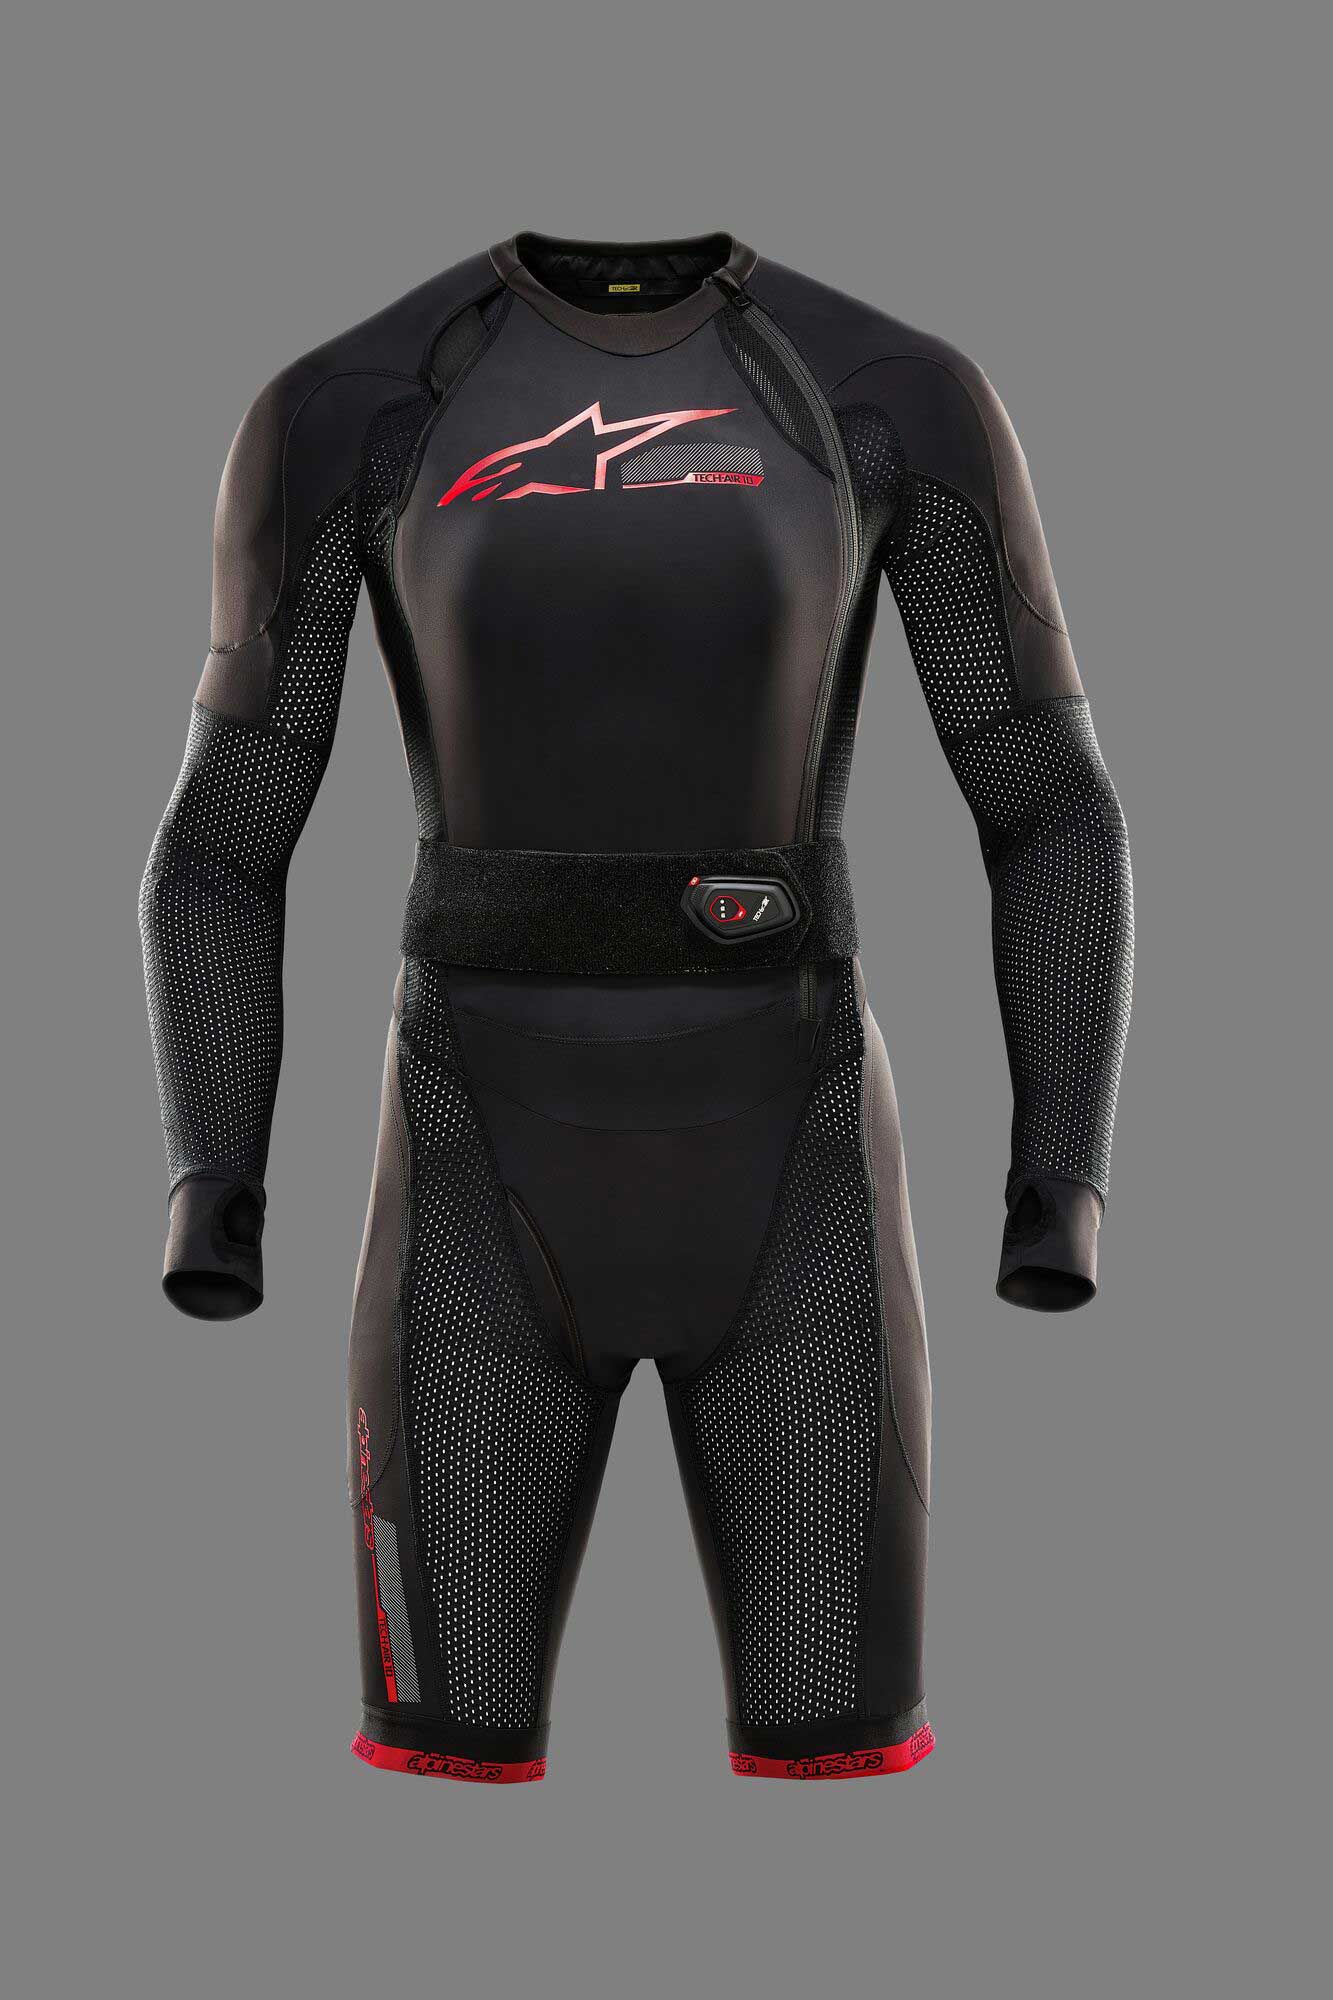 Avaliable now, the Alpinestars Tech-Air 10 is the most protective airbag system on the market.